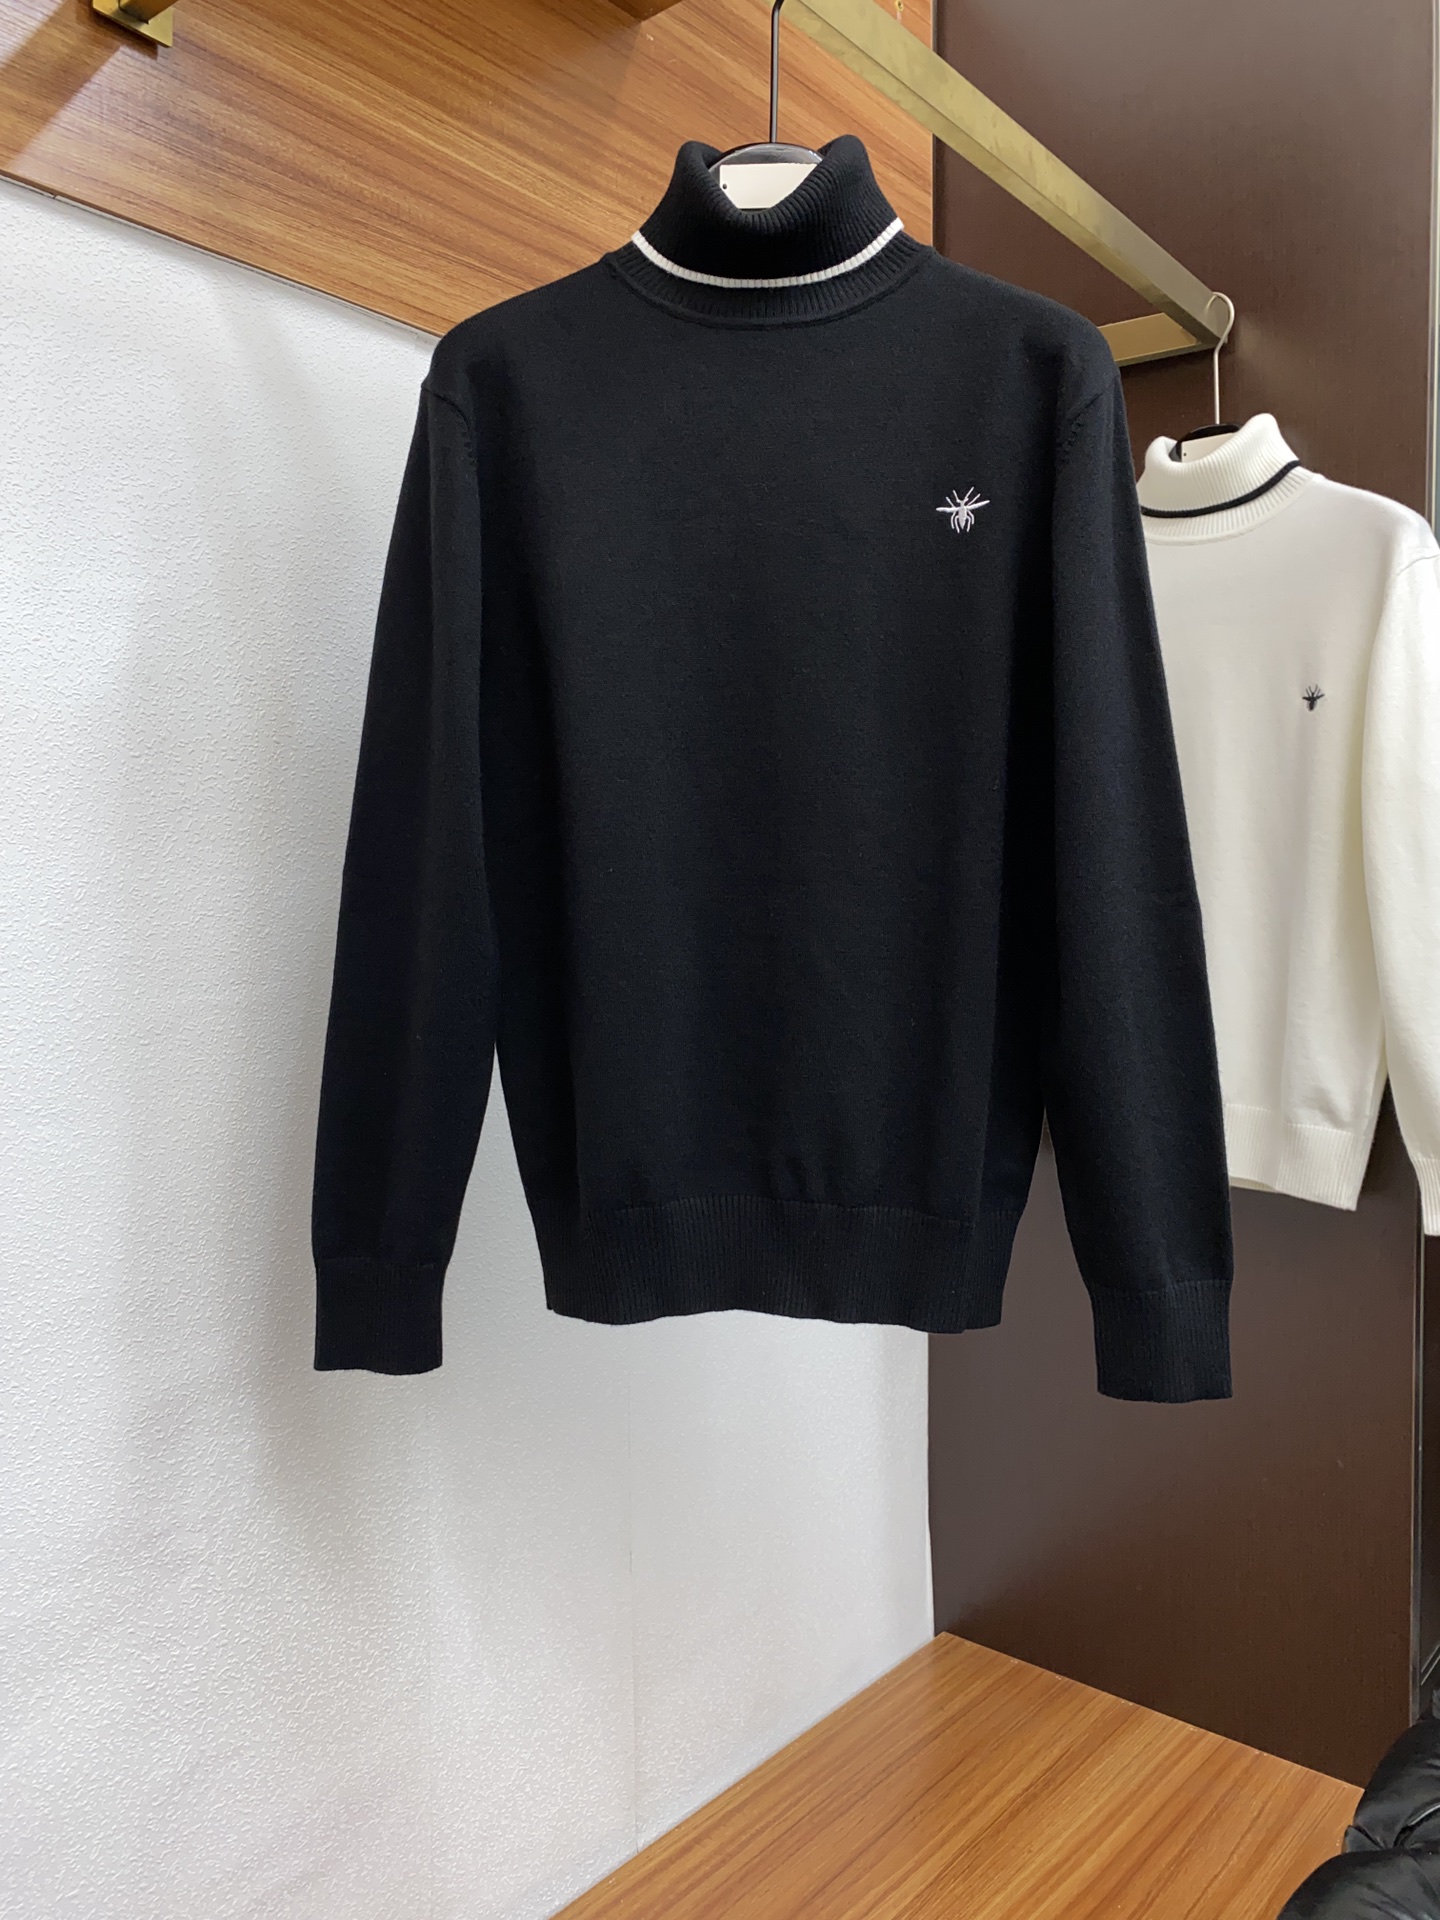 Dior Clothing Sweatshirts Men Polyester Wool Fall/Winter Collection Fashion Casual